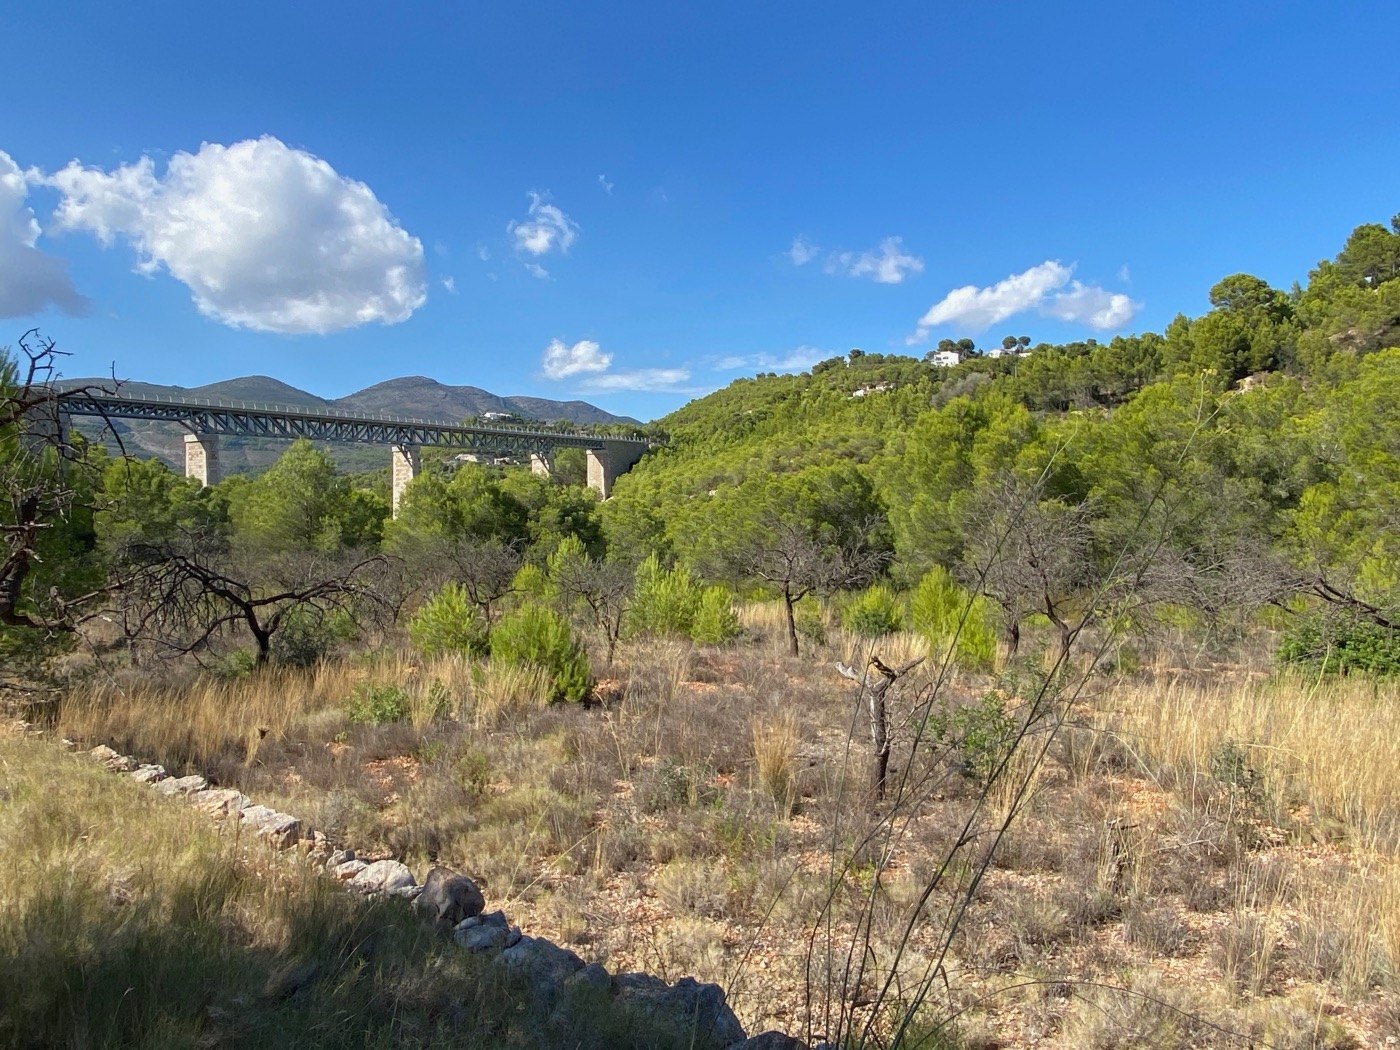 Rustic land well located, quite flat, in rural area near Calpe.